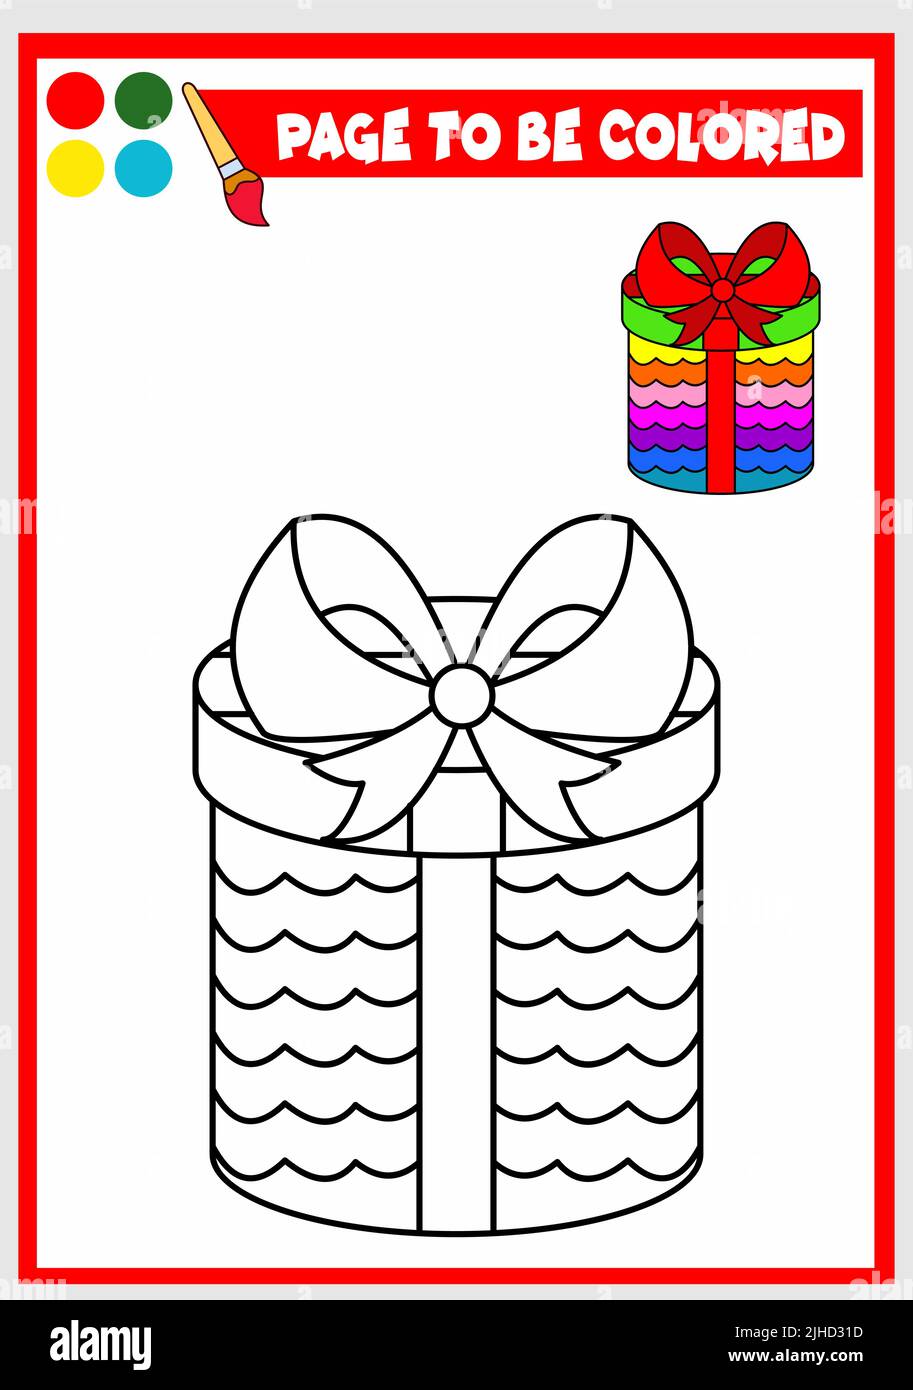 https://c8.alamy.com/comp/2JHD31D/coloring-book-for-kids-gift-box-vector-2JHD31D.jpg